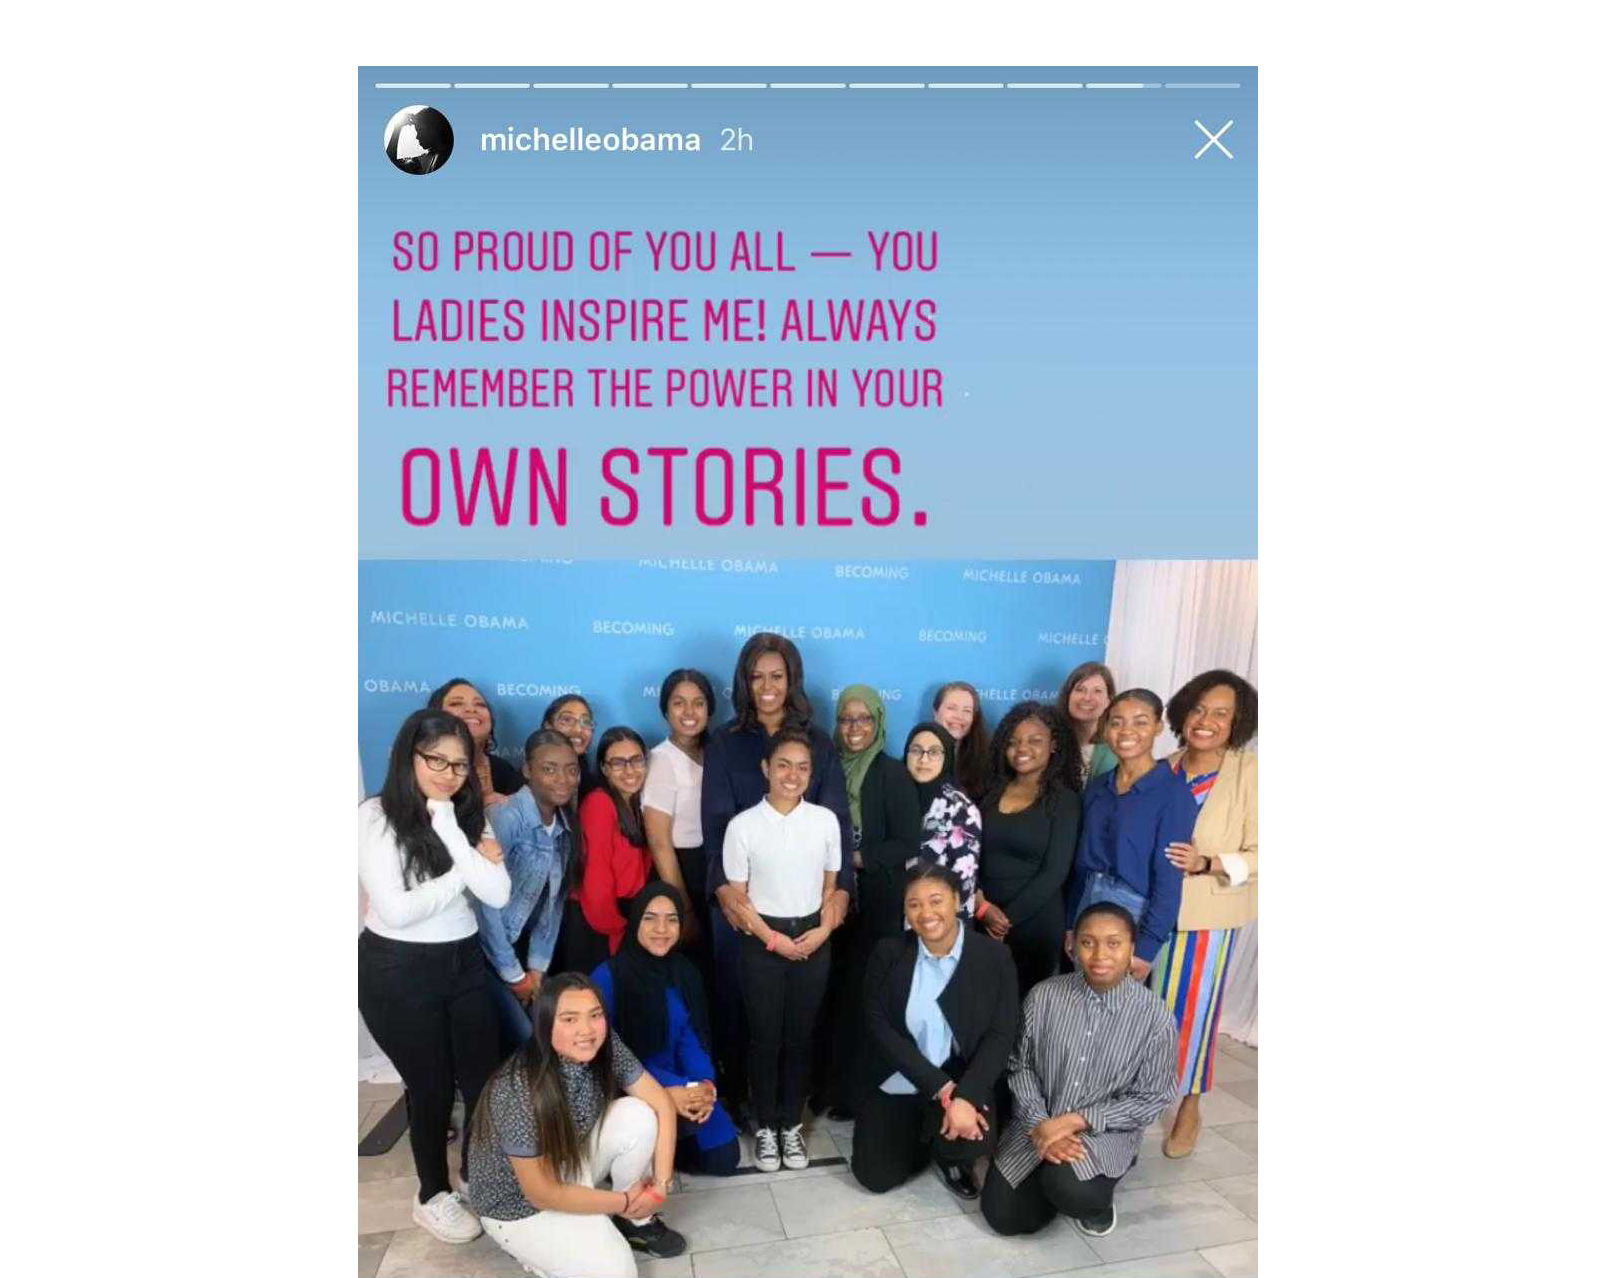  Teen Girls Enjoy Private Meeting with Michelle Obama